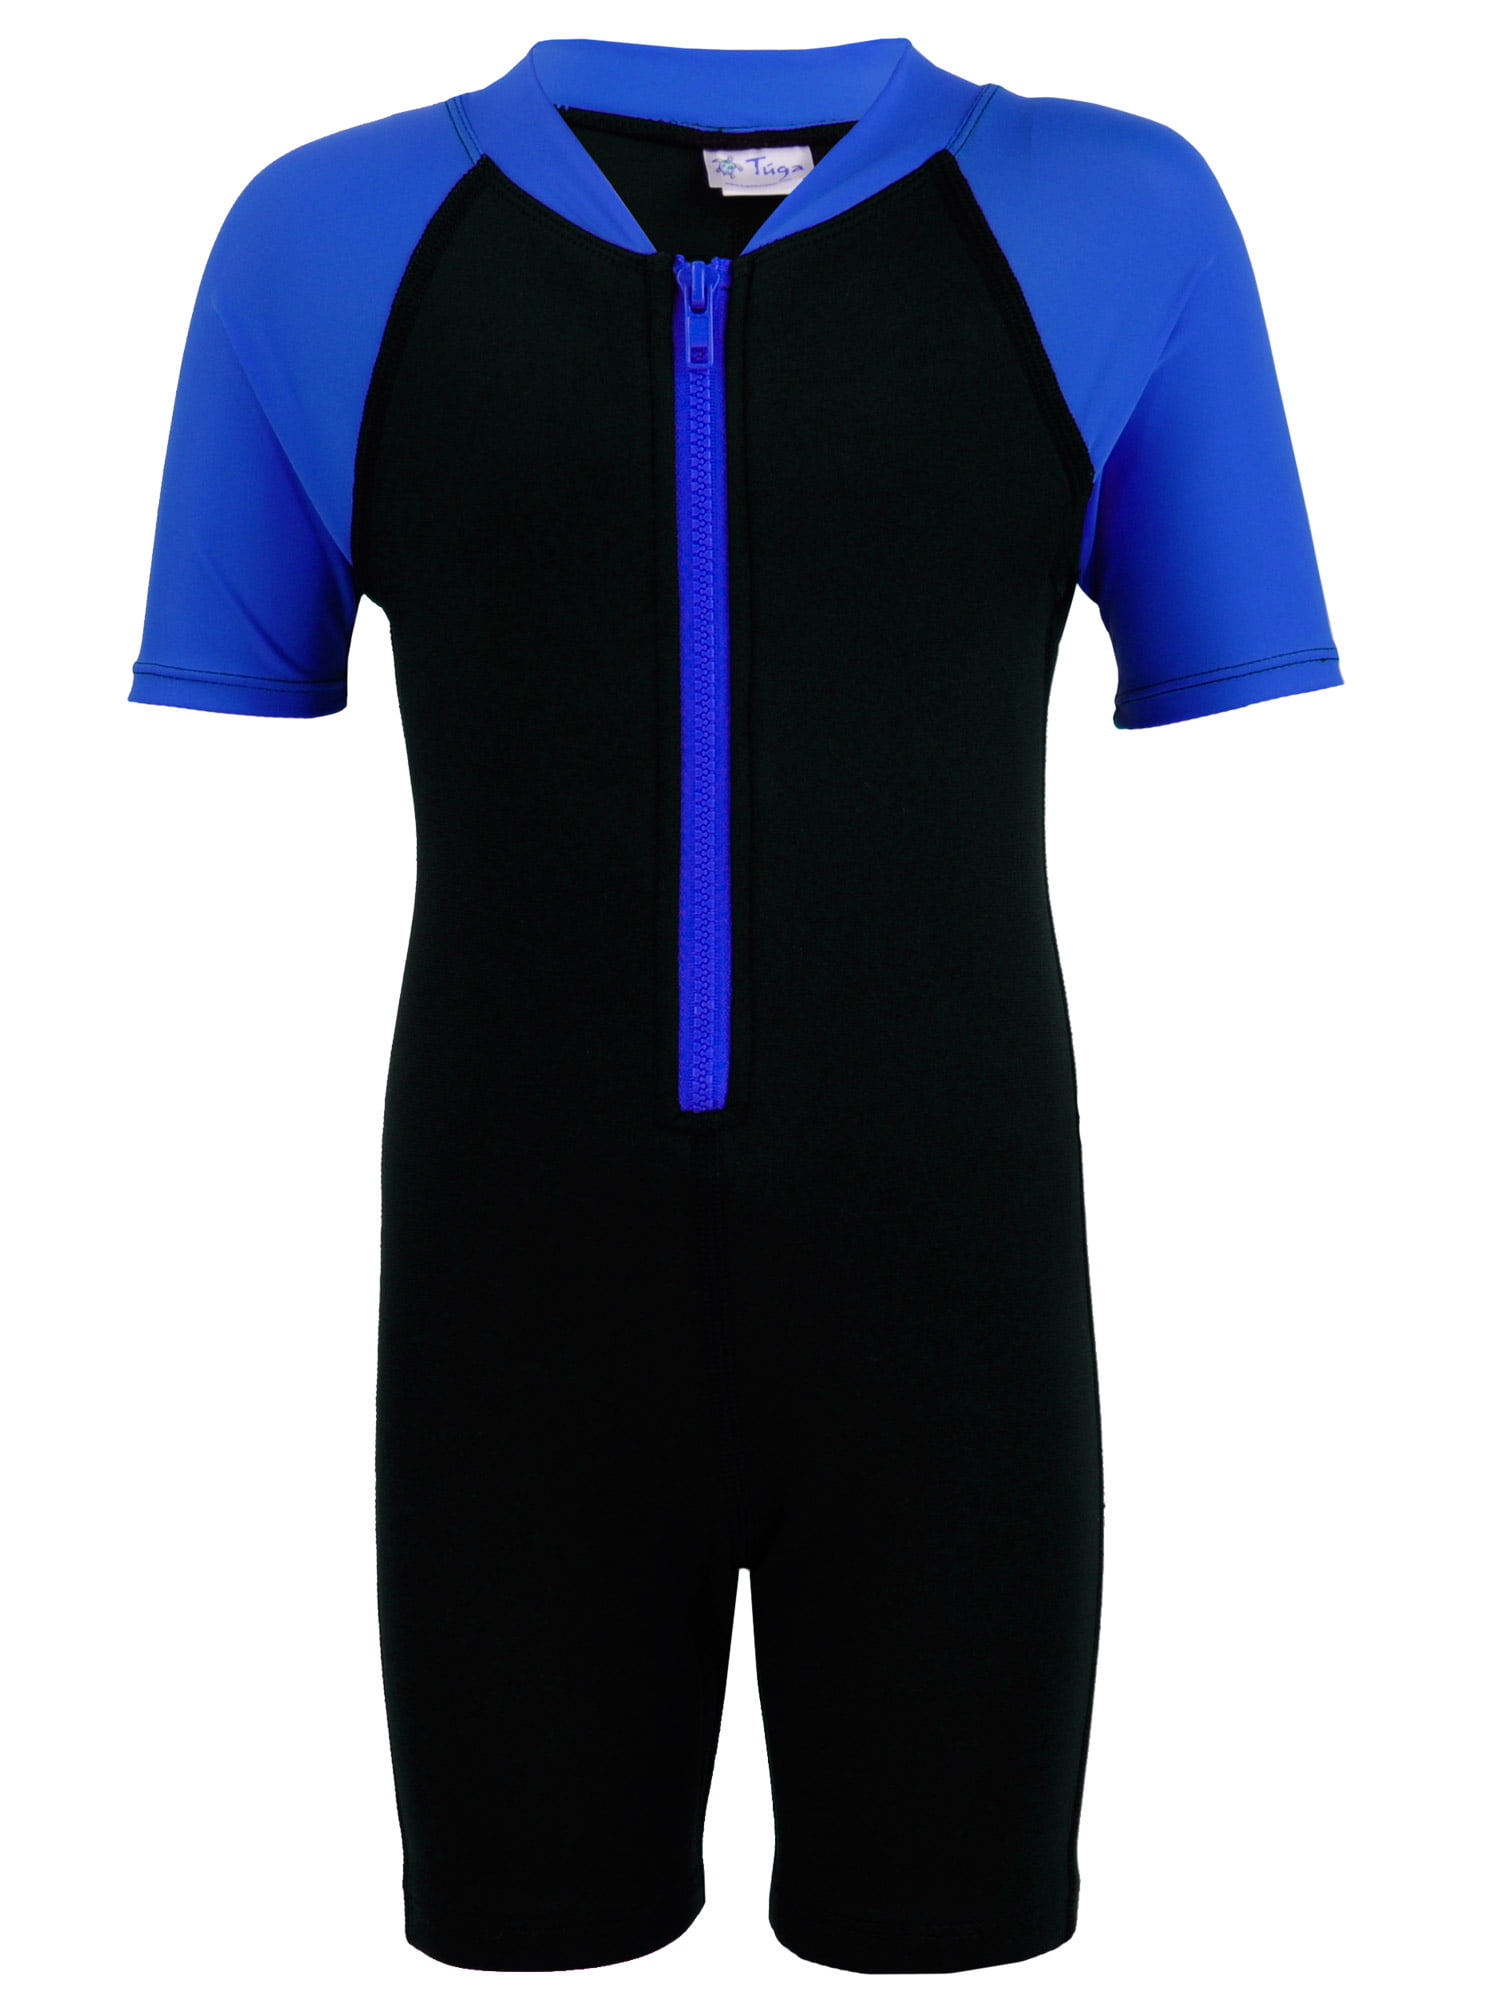 Sun Protection Tuga Boys Thermal Wetsuit 1-14 years UPF 50